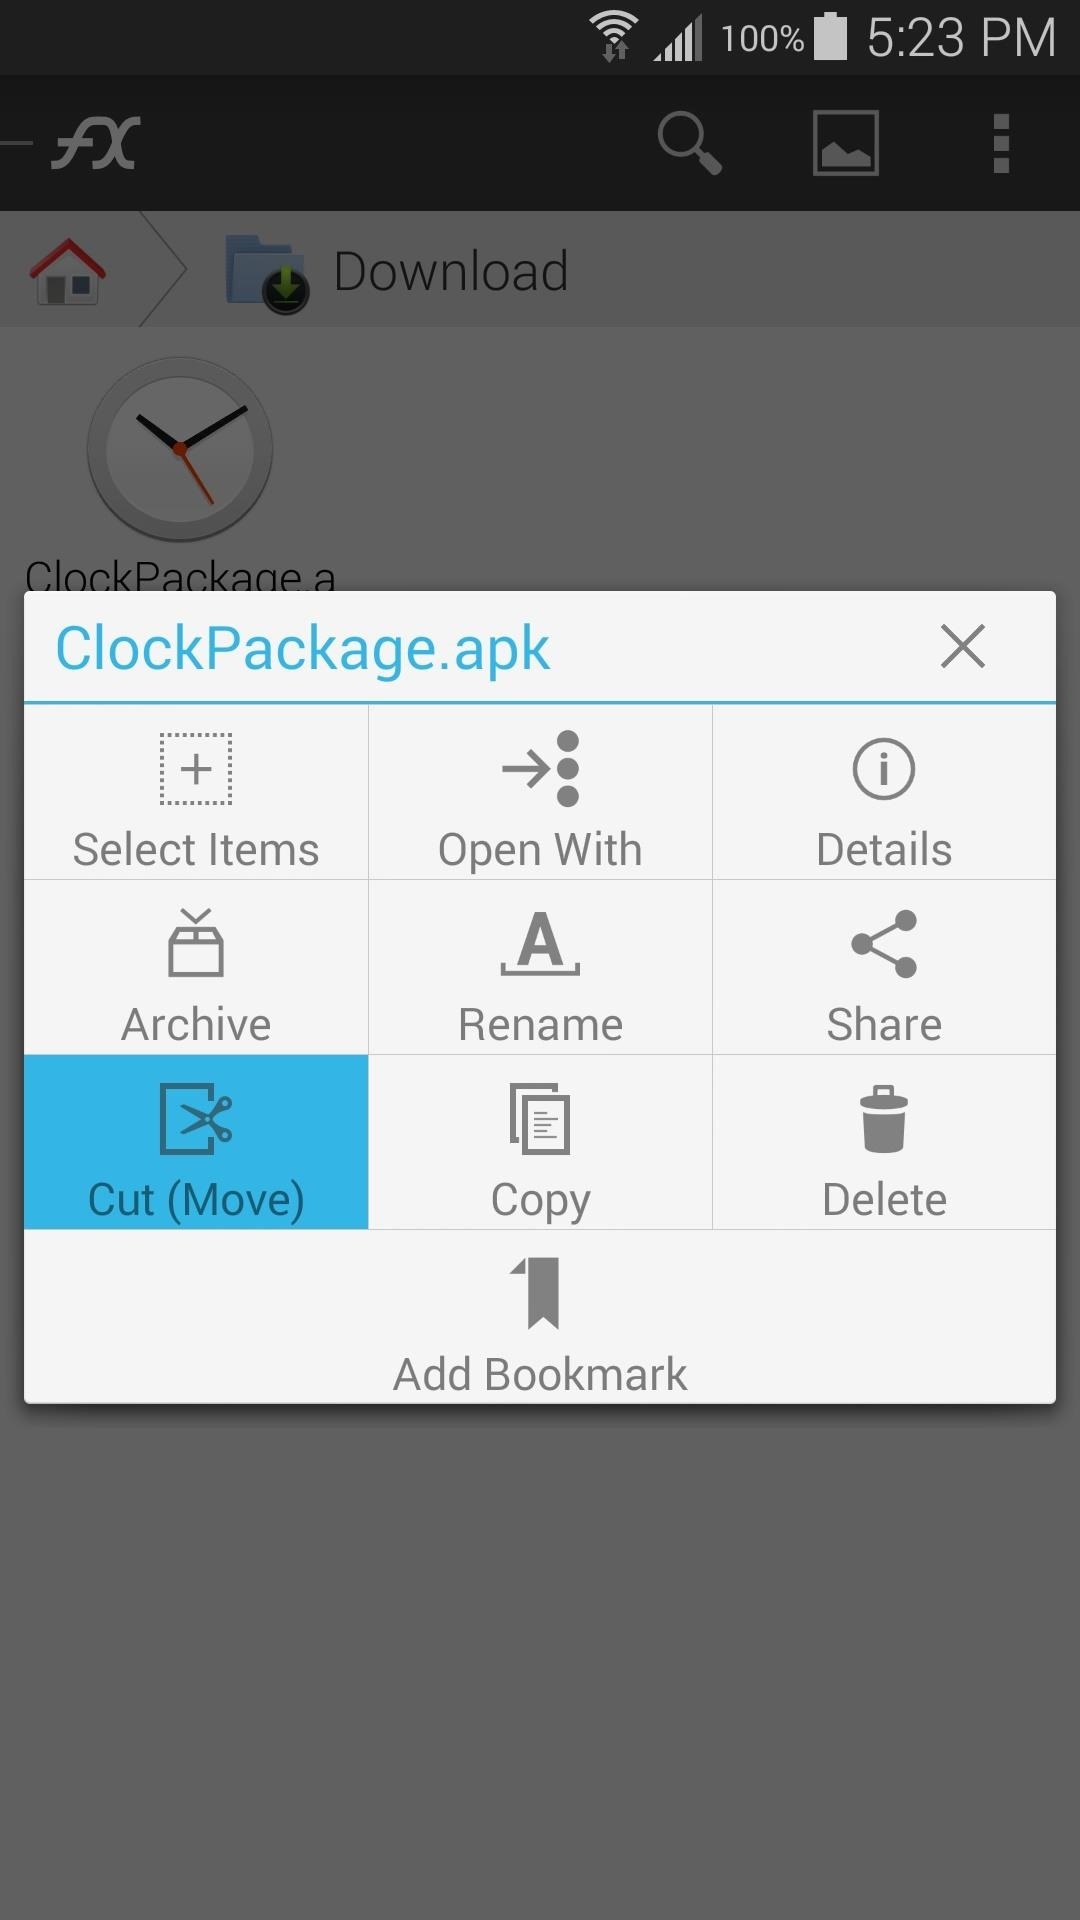 How to Black Out System Apps on Your Samsung Galaxy S5 for Better Battery Life